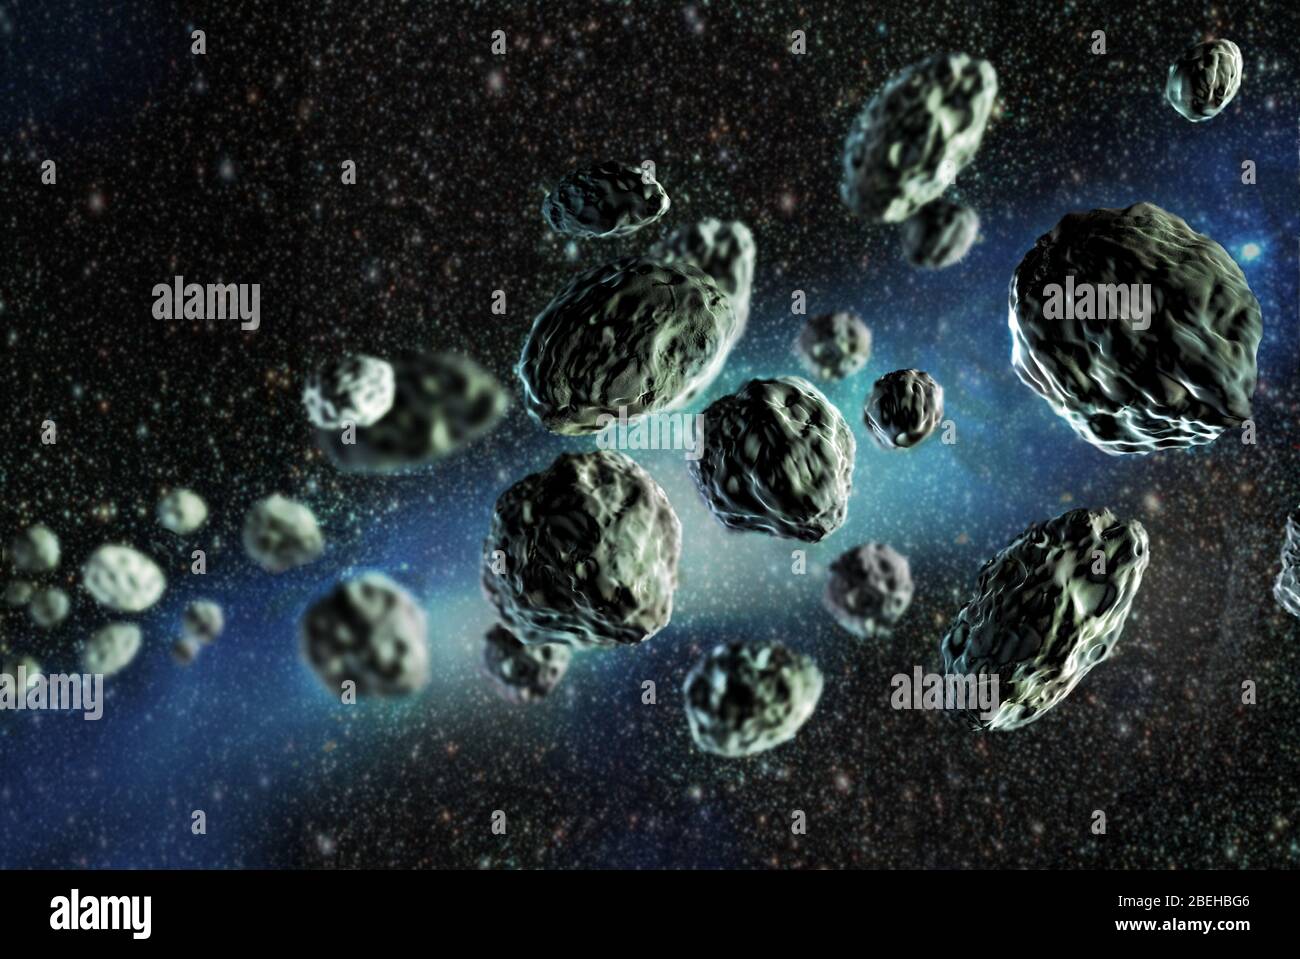 A Swarm of Asteroids in Front of the Milky Way Galaxy Stock Illustration -  Illustration of crater, catastrophe: 112968004